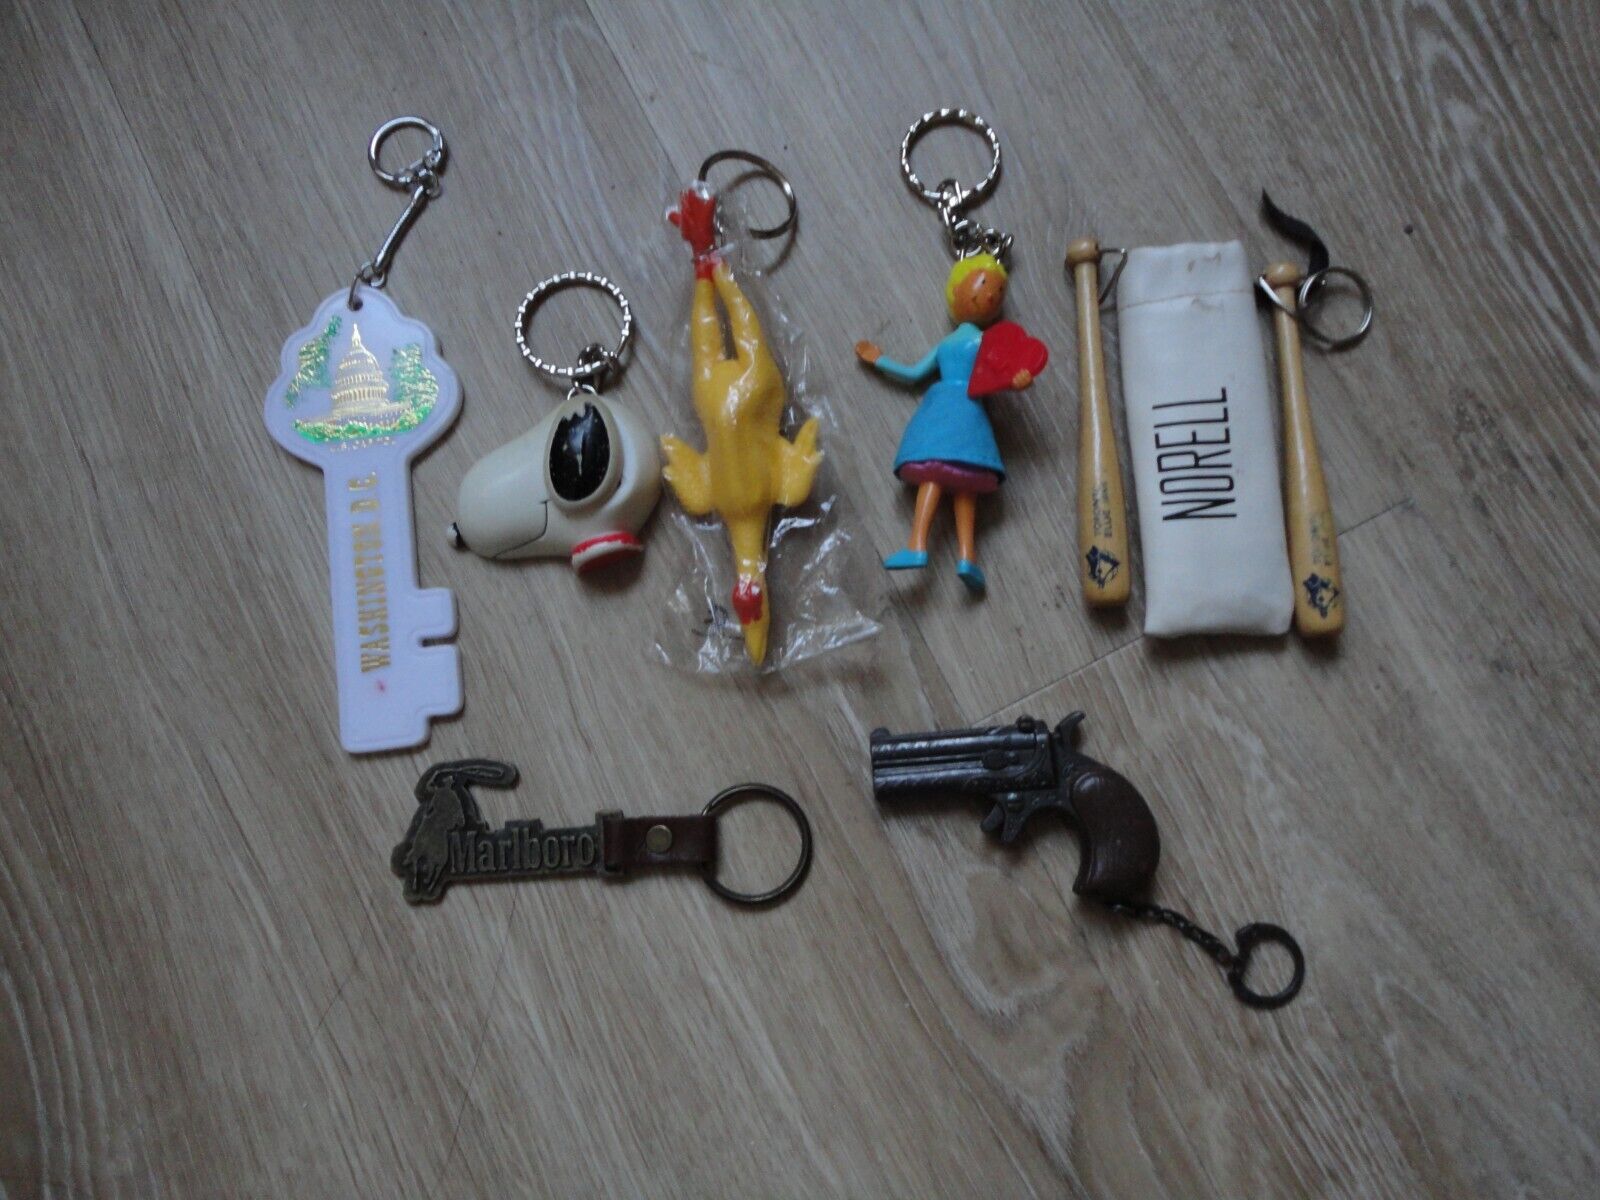 The vintage lot of 7 large keychain